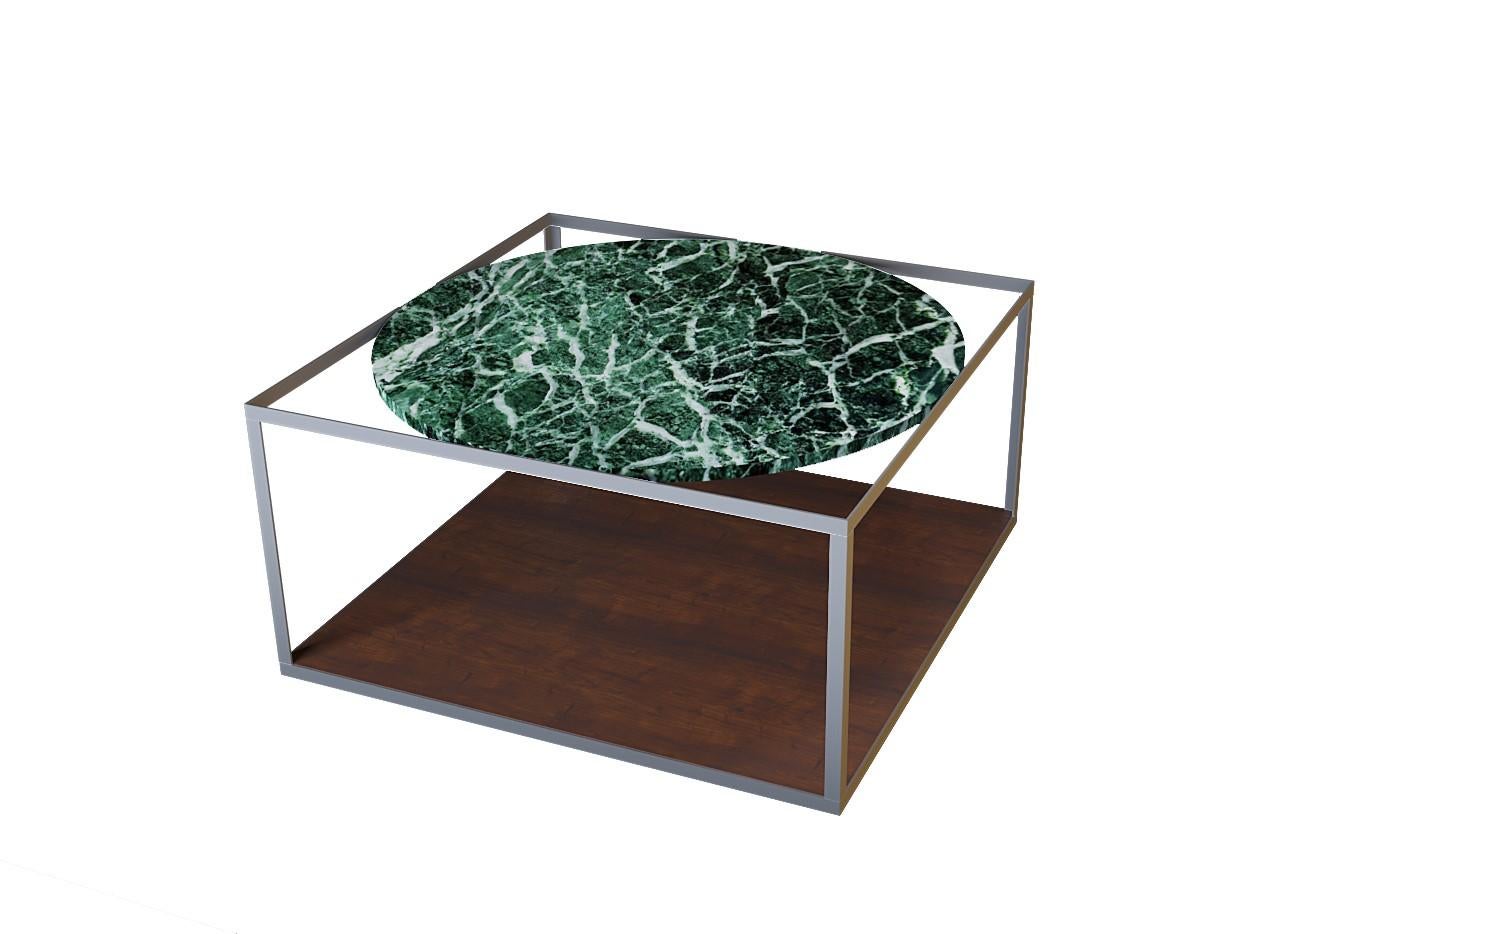 Chinese NORDST GAARD Coffee Table, Italian White Mountain Marble, Danish Modern Design For Sale